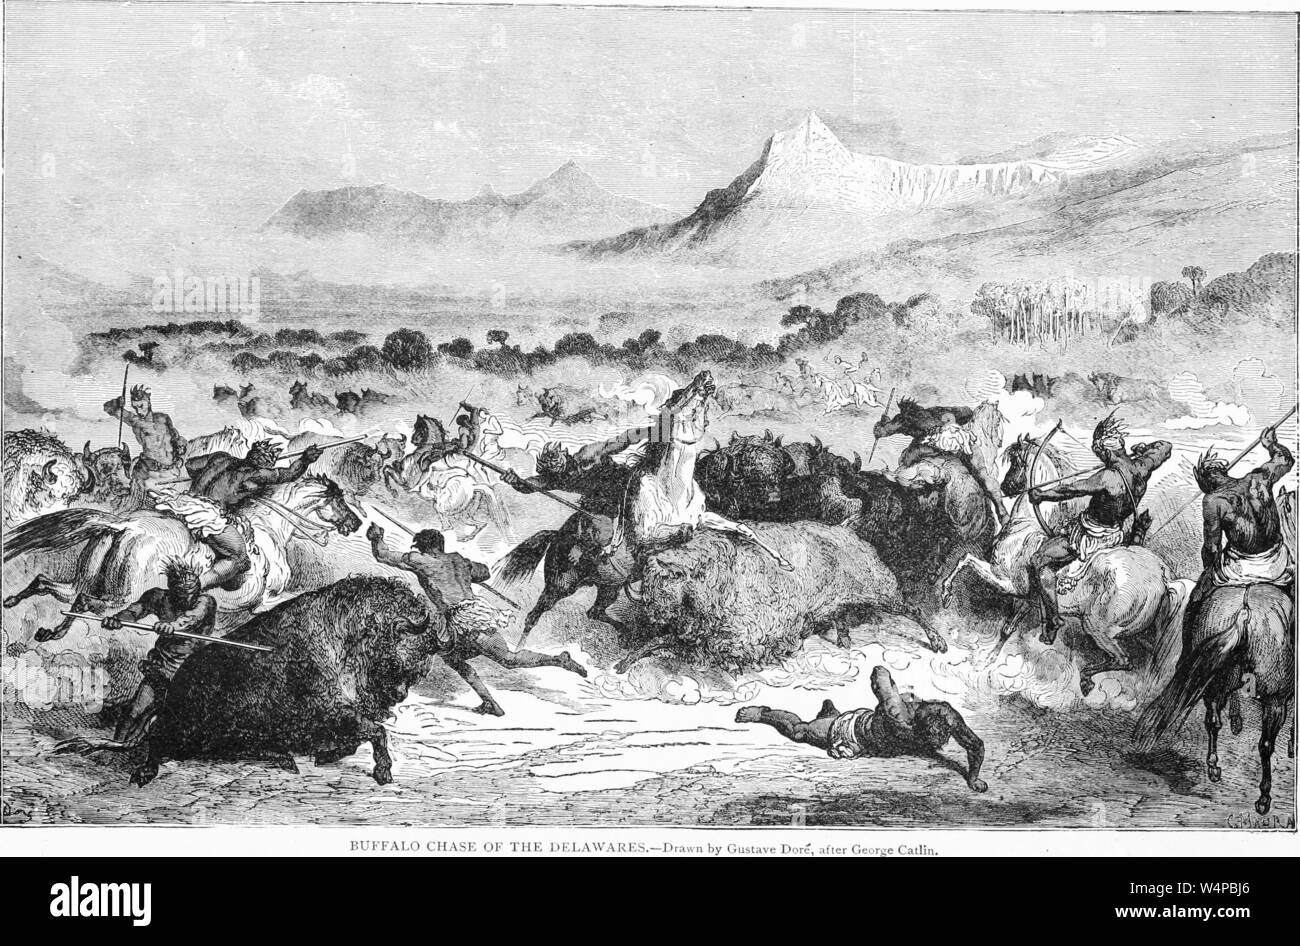 Engraved drawing of the Delaware Indians hunting Buffaloes, from the book 'Ridpath's Universal history' by John Clark Ridpath, 1897. Courtesy Internet Archive. () Stock Photo